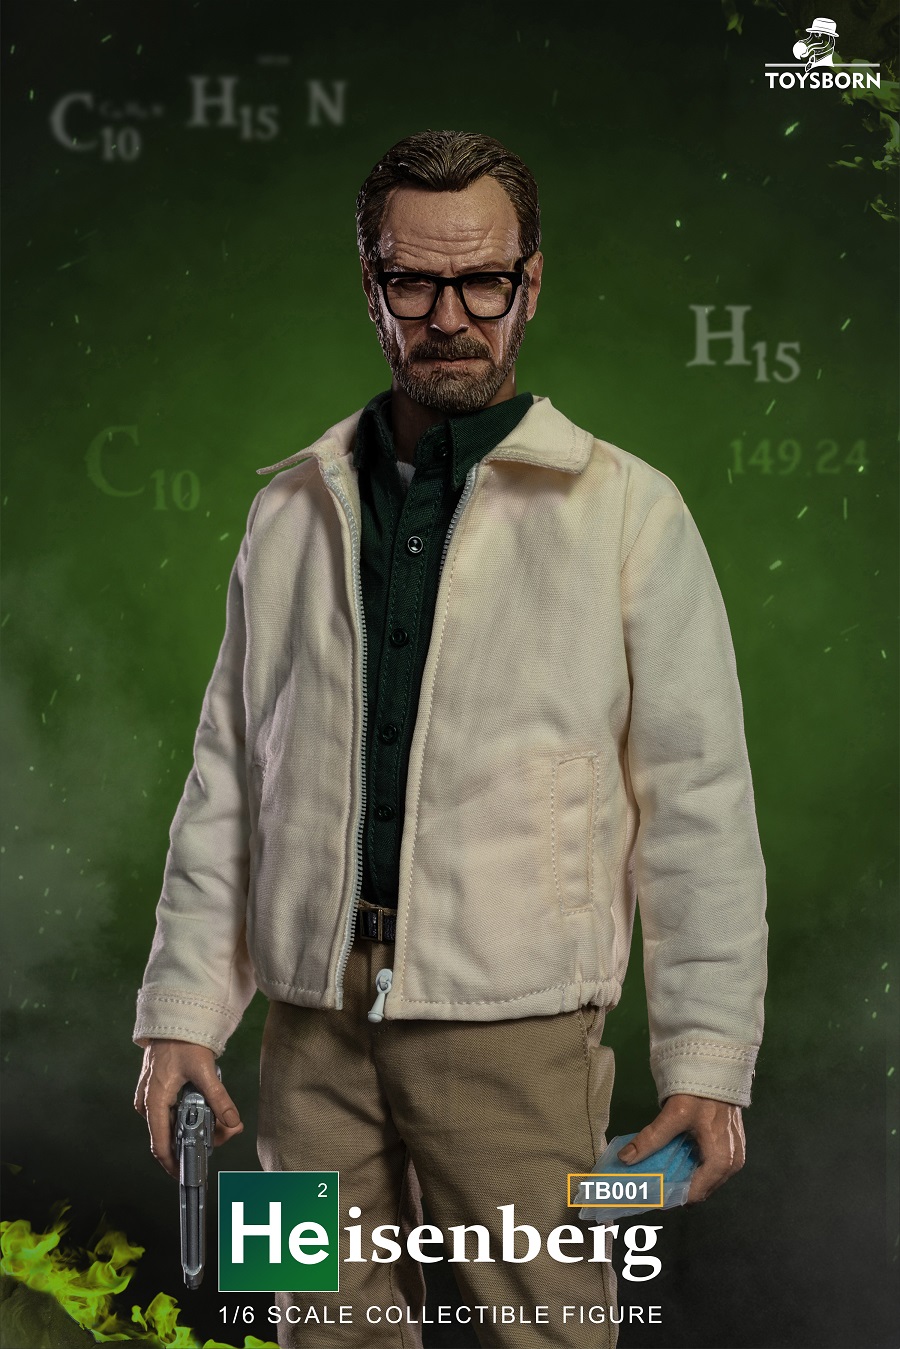 cableTV-based - NEW PRODUCT: TOYS BORN TB001 Heisenberg 1/6 action figure 16122811